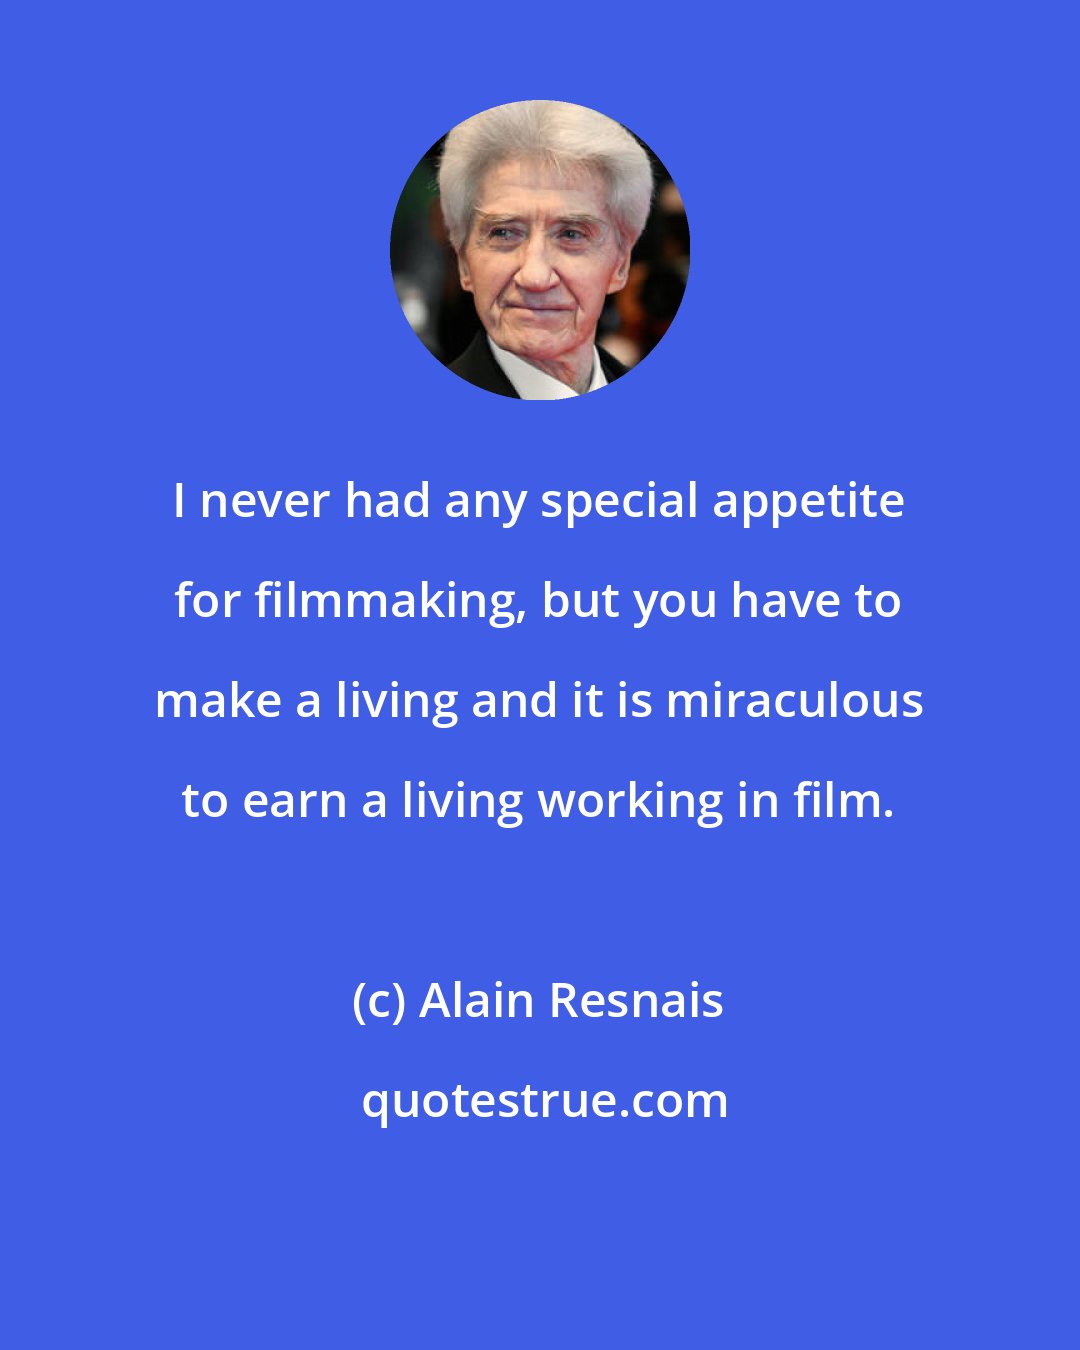 Alain Resnais: I never had any special appetite for filmmaking, but you have to make a living and it is miraculous to earn a living working in film.